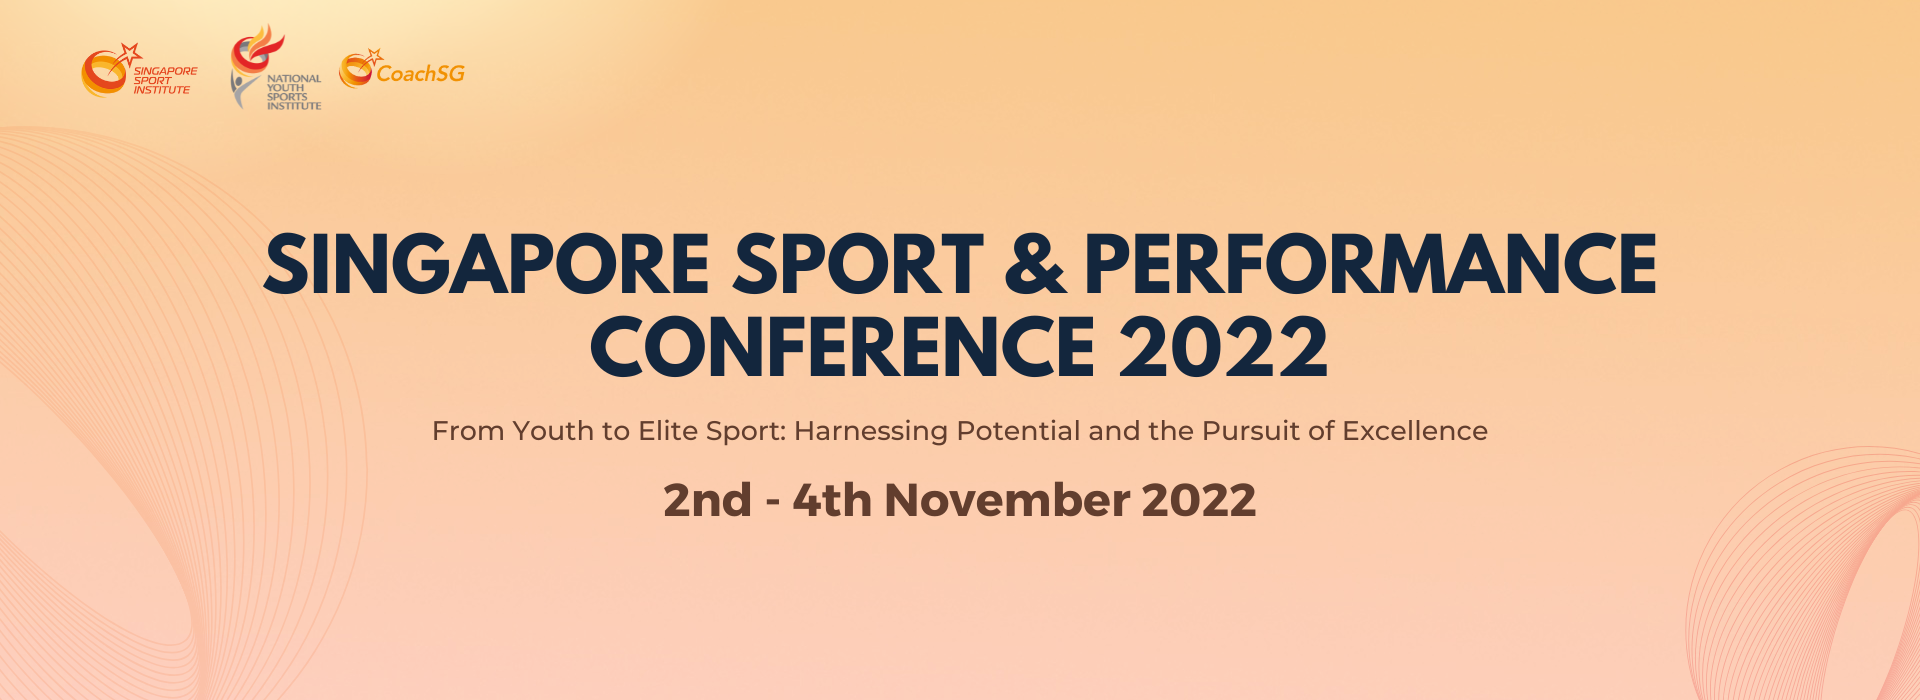 Singapore sport  performance conference 2022 5.png